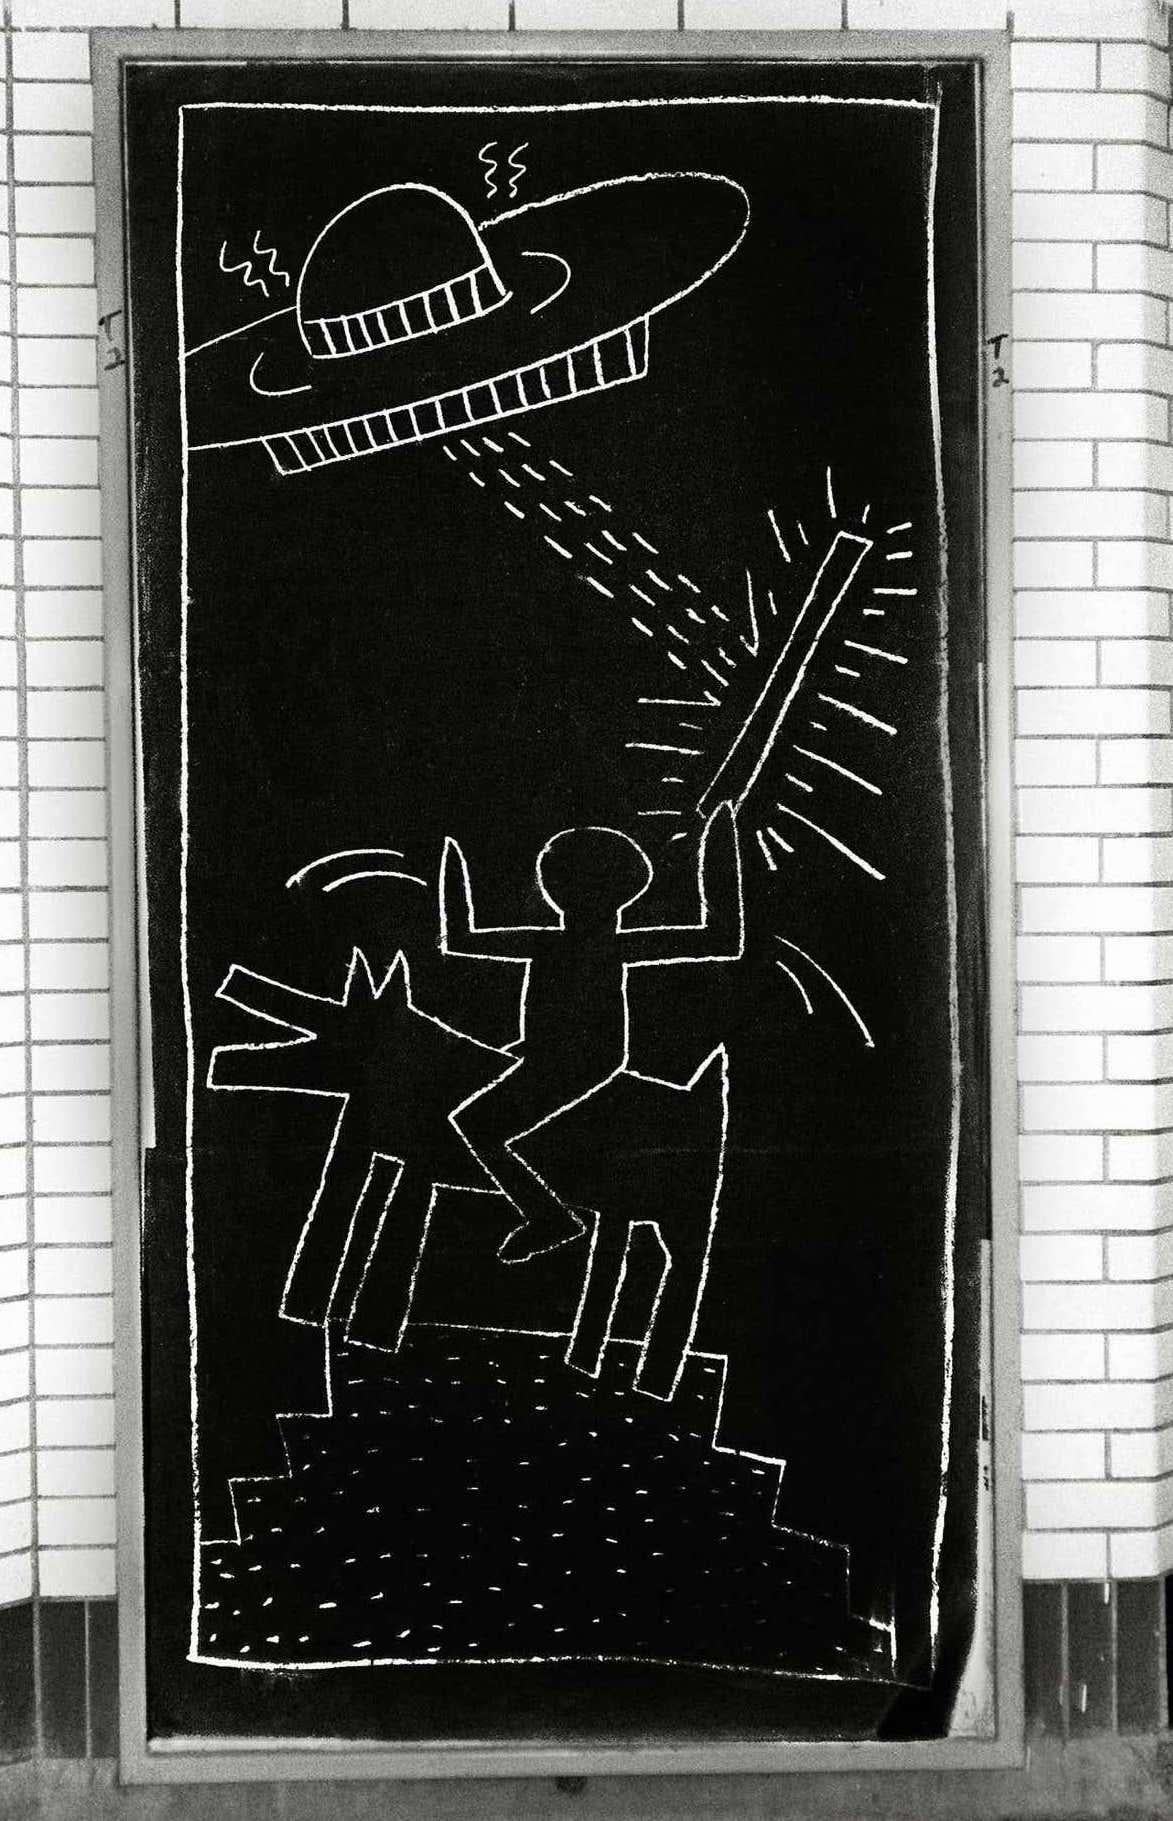 Keith Haring Subway Drawings Photograph:
This photograph captures Keith Haring's epic conquest, producing public art across the New York City subway platforms, during the early 80's. Haring intended for these drawings to be temporary works of